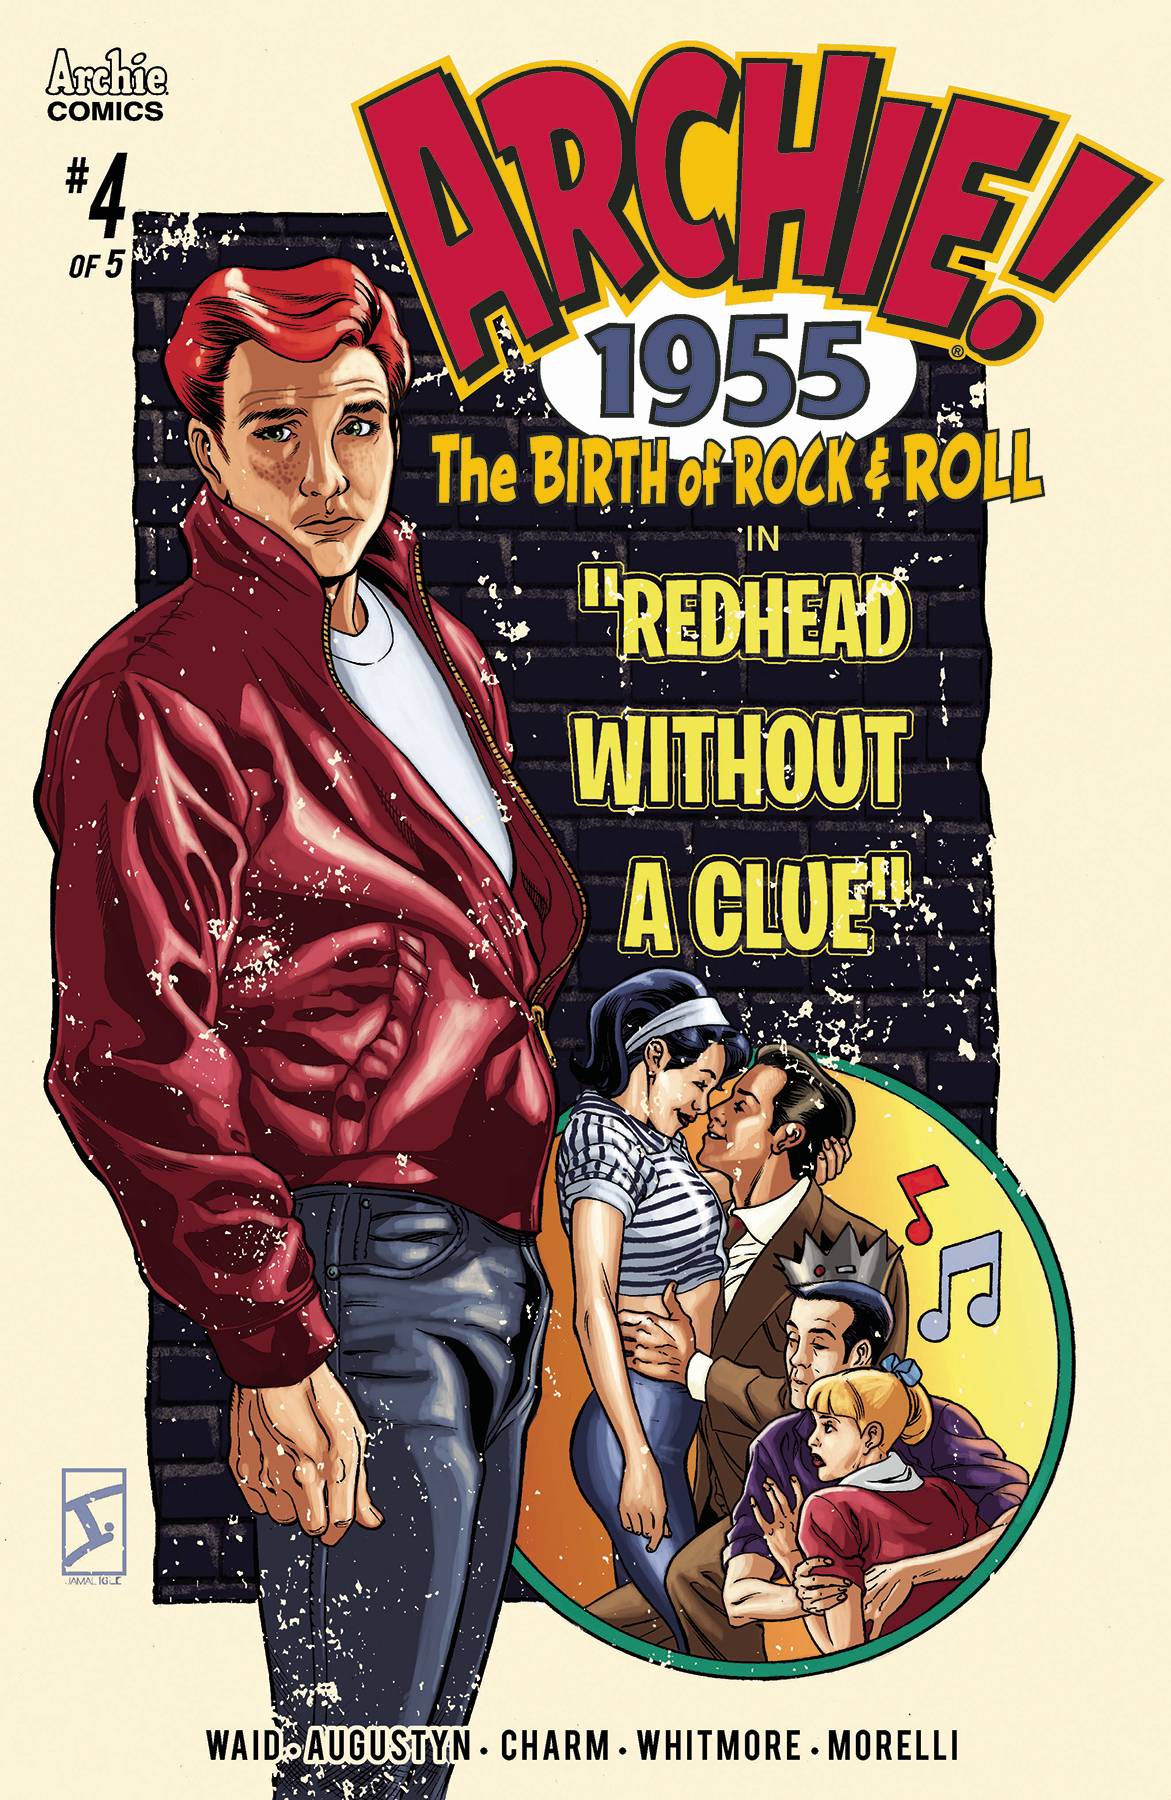 Archie 1955 #4 Cover C Igle (Of 5)